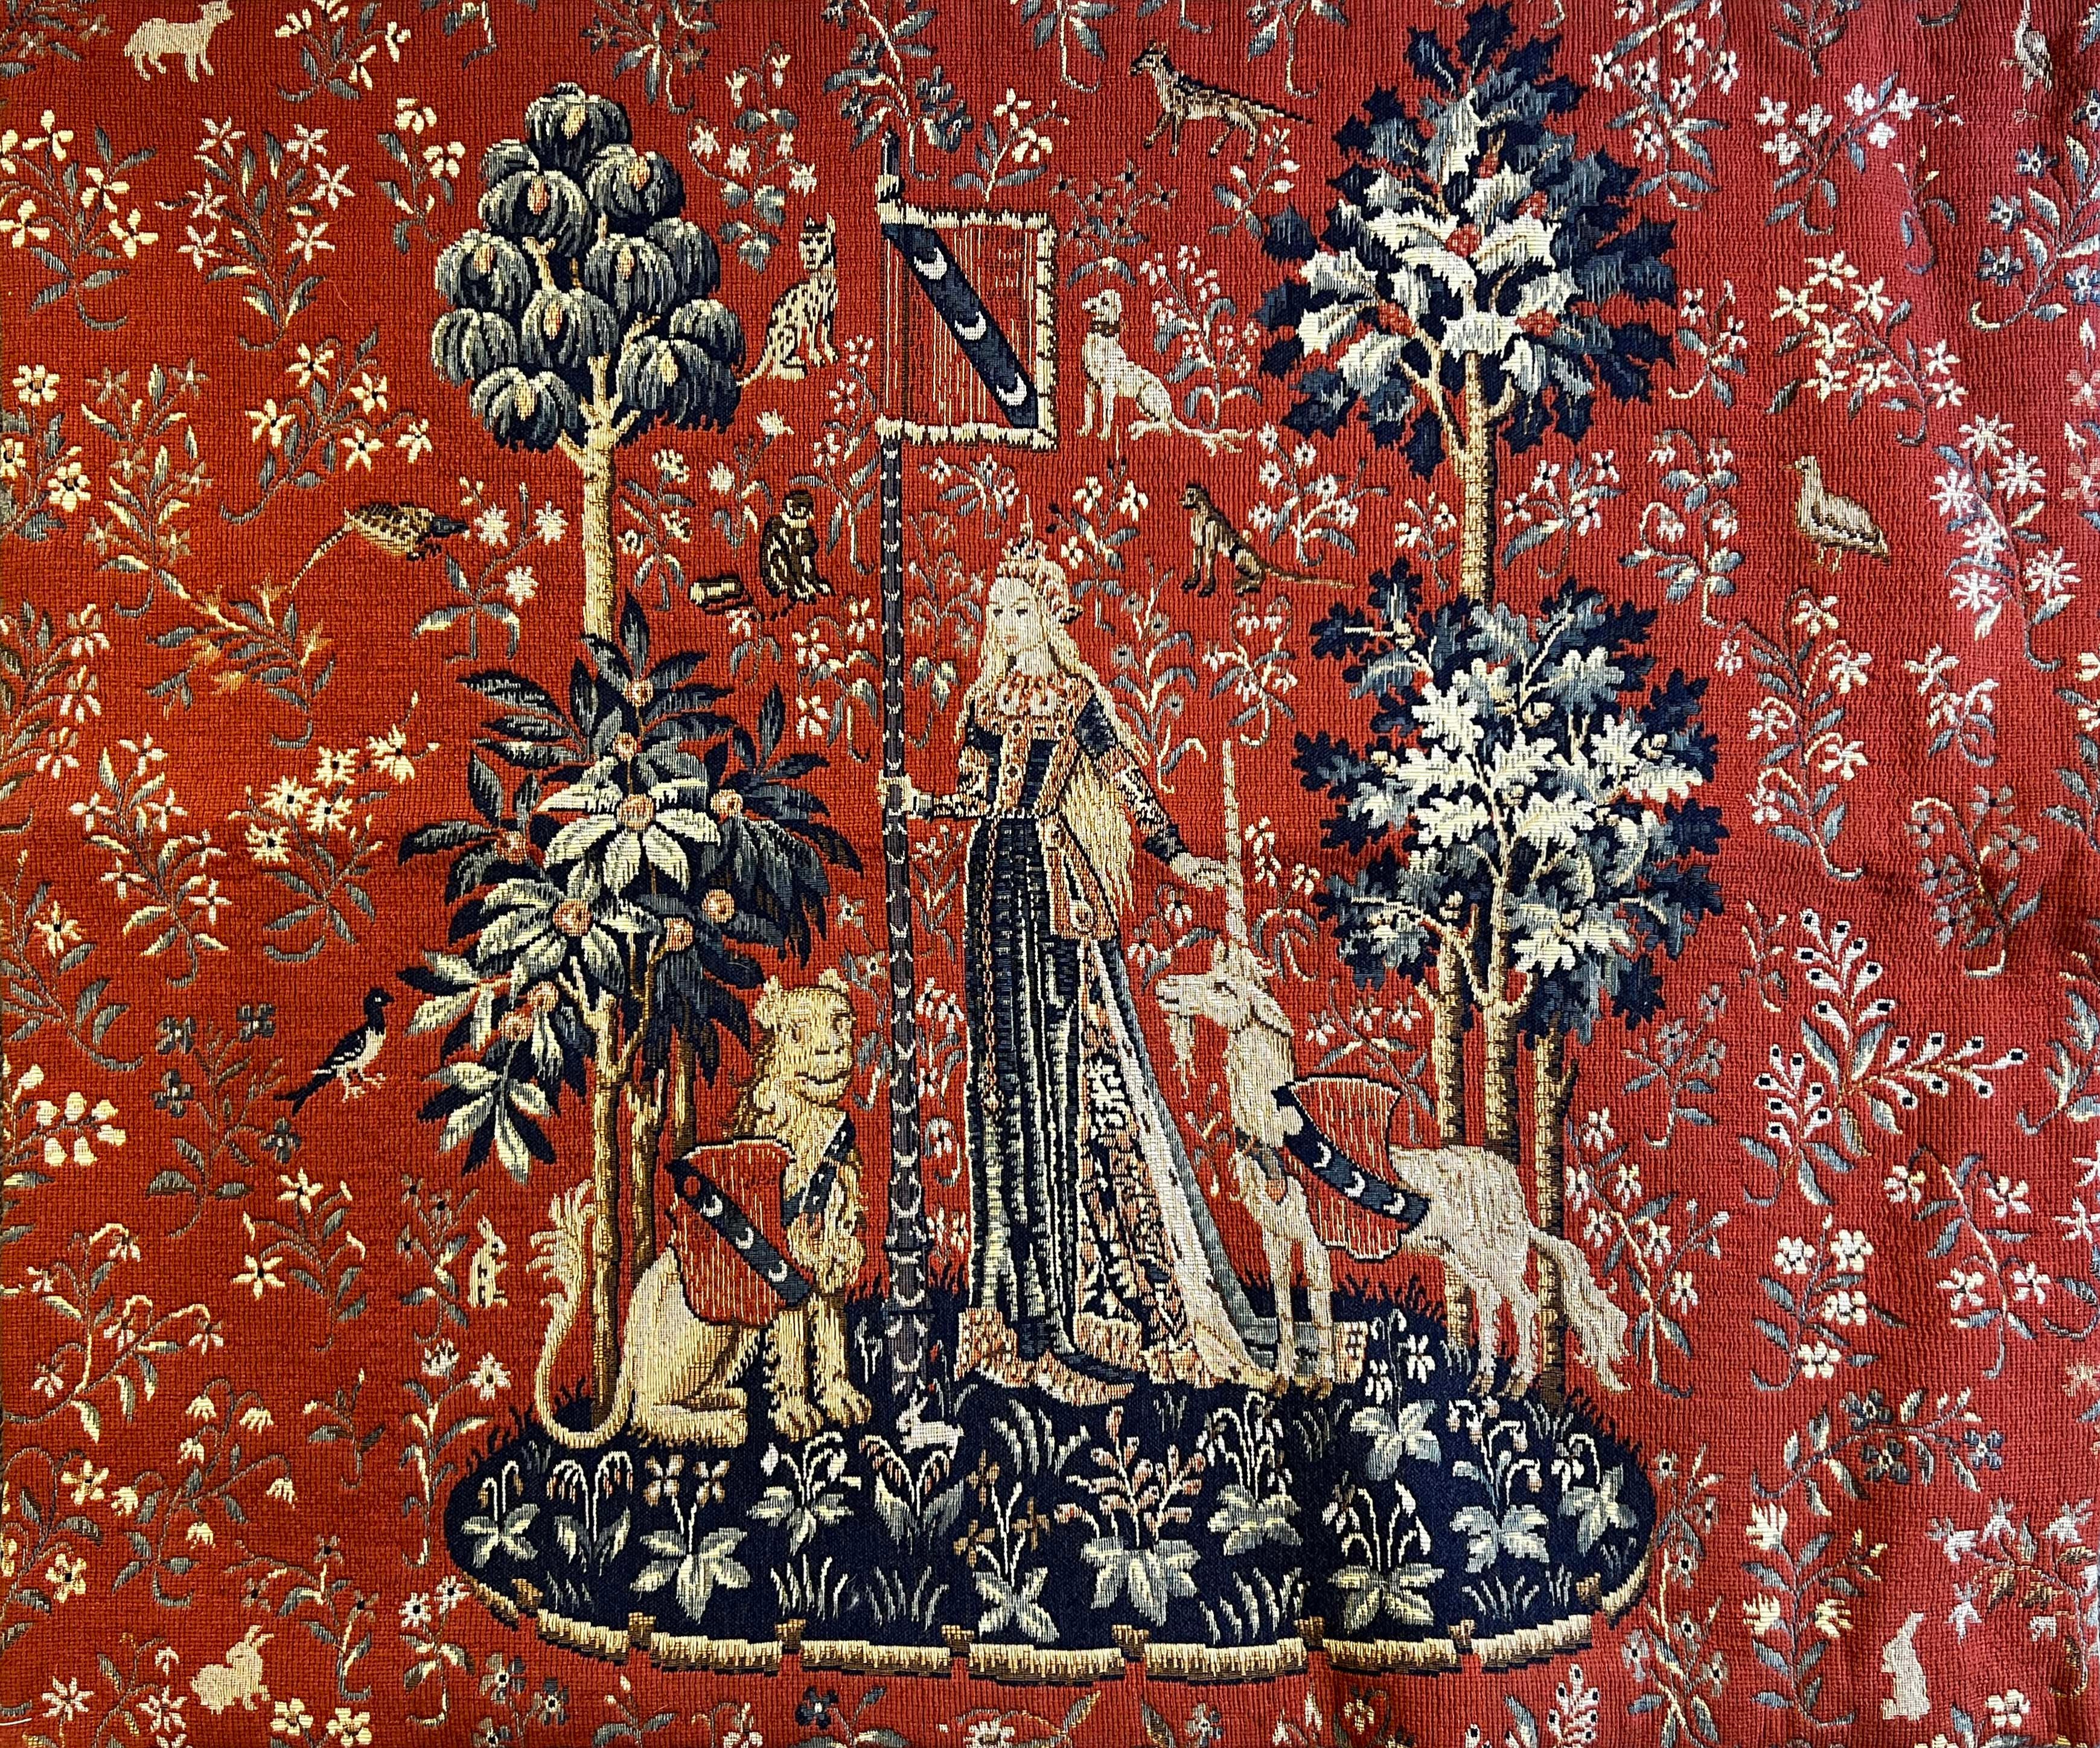 984 - Jacquard Tapestry "Touch" is from the Lady with the Unicorn Series